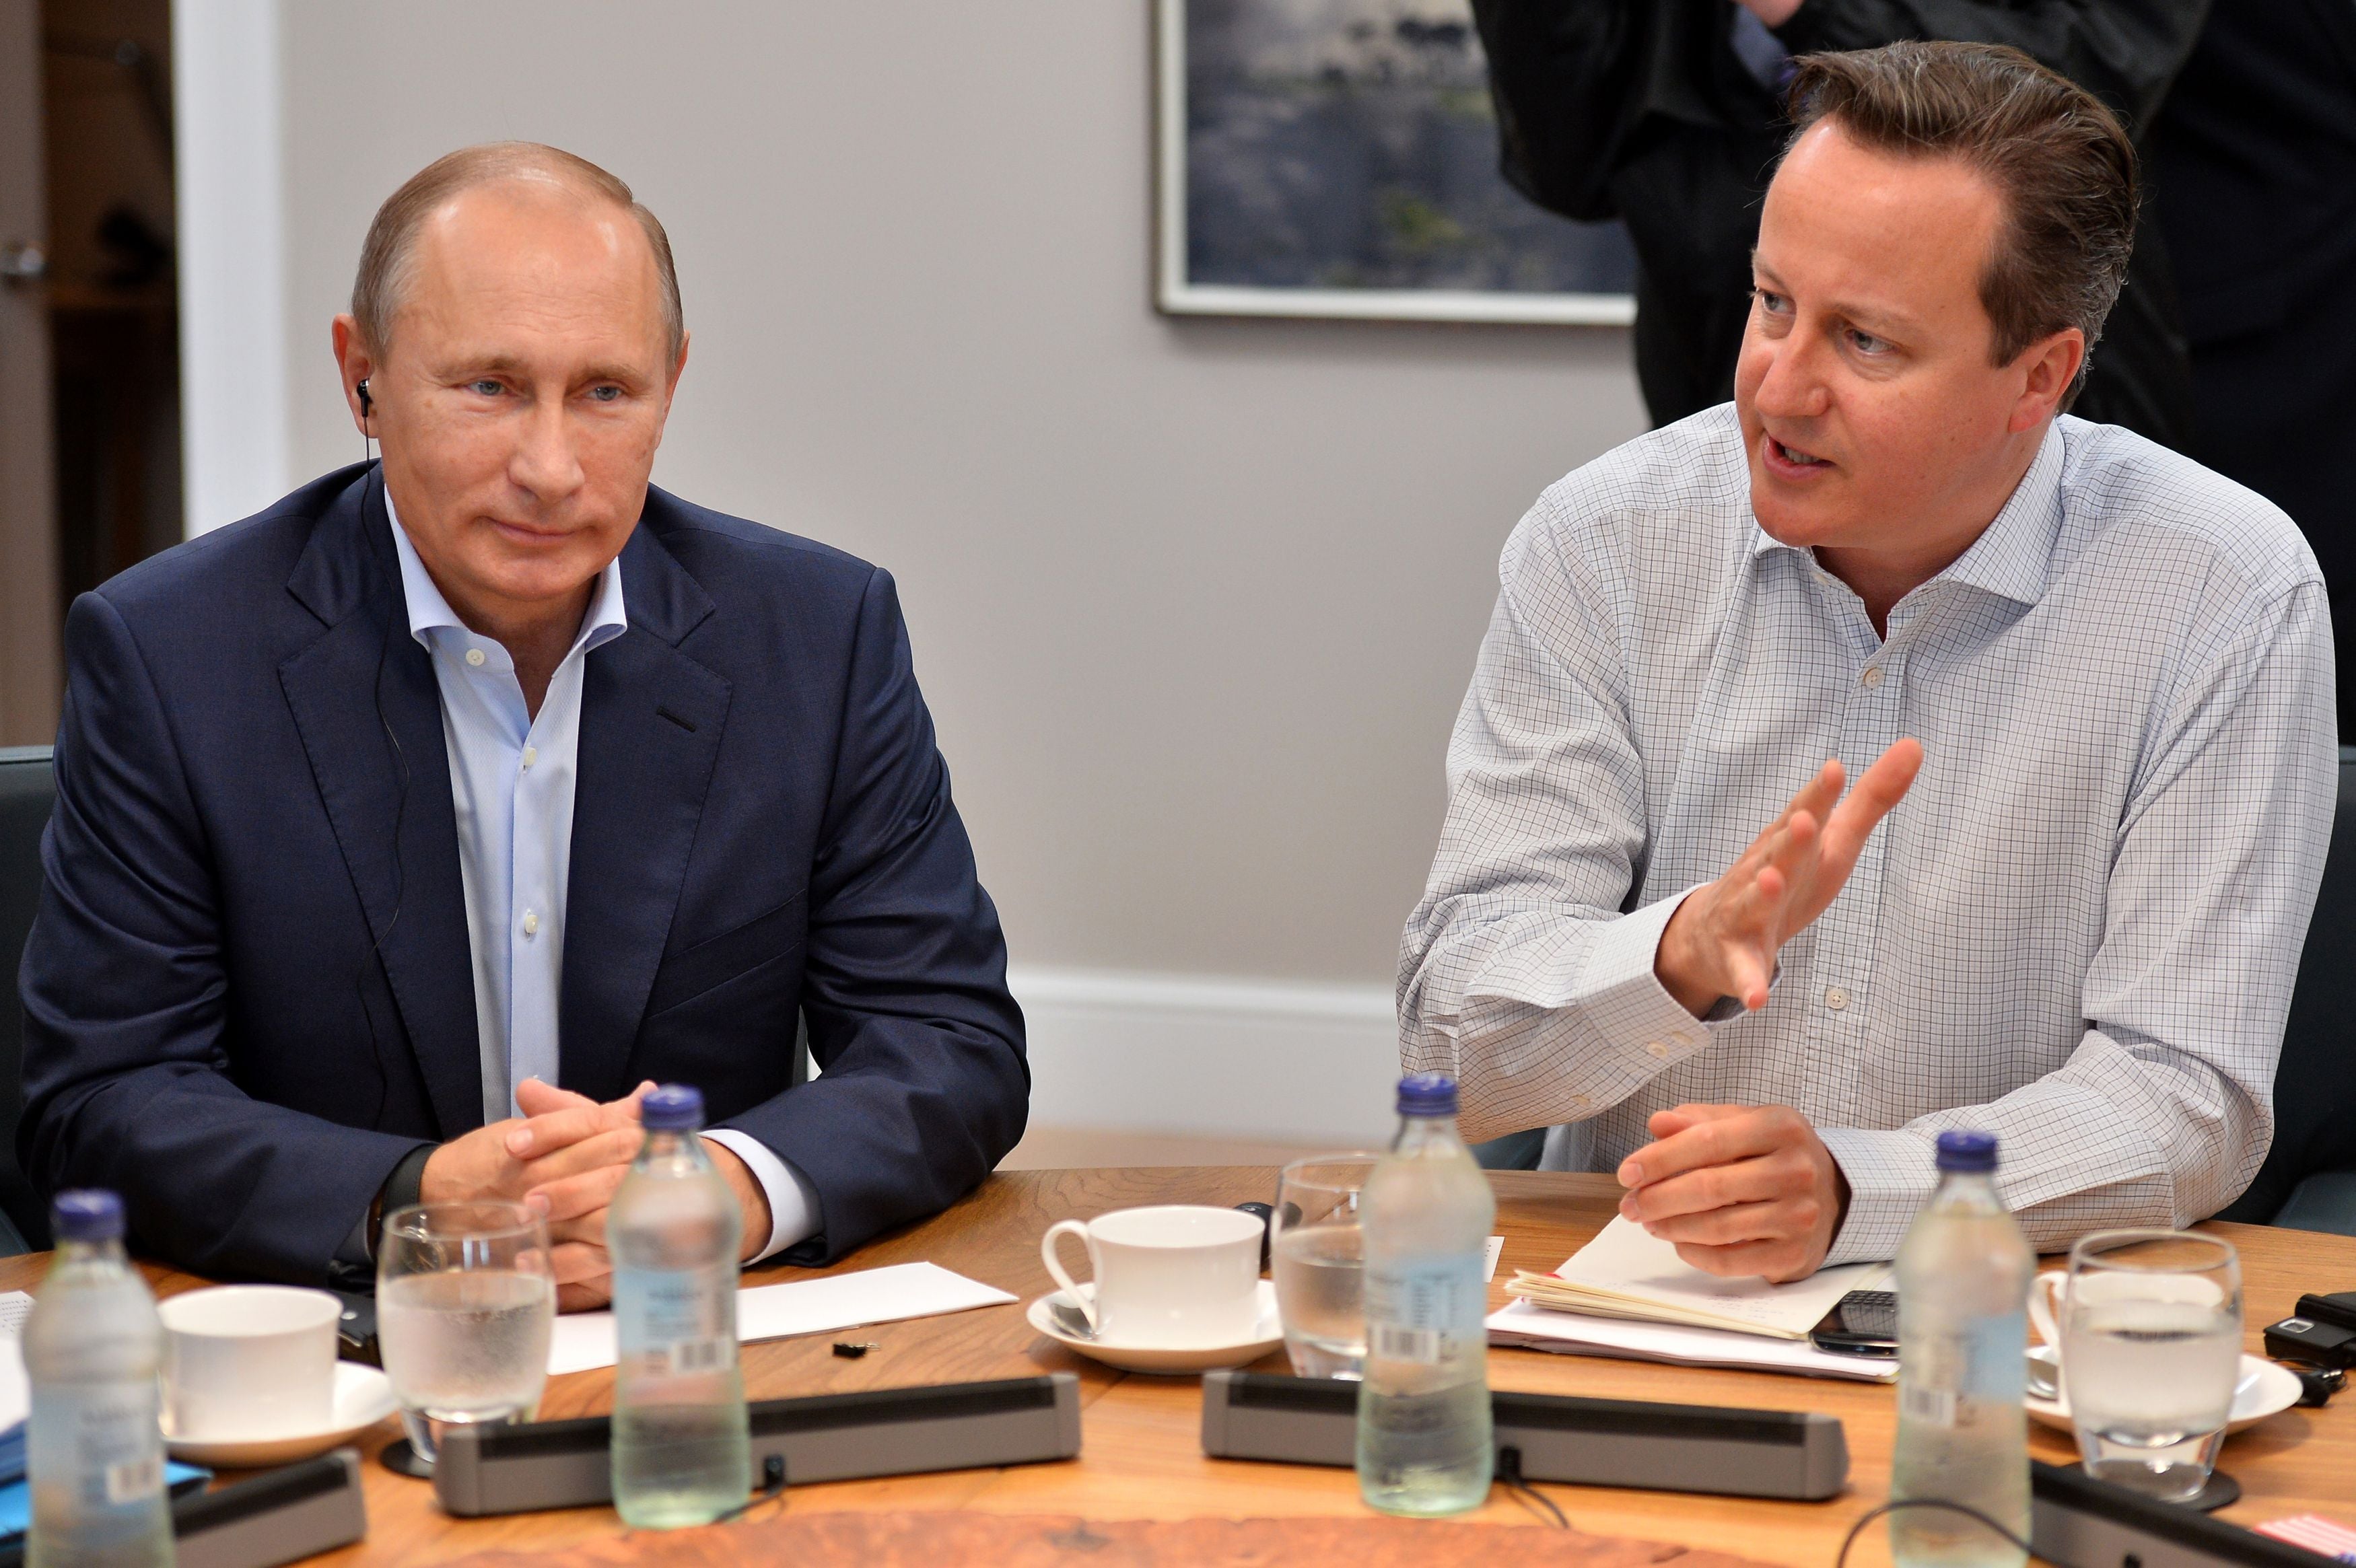 David Cameron and Russian President Vladimir Putin at the second plenary session of the G8 summit in Enniskillen, Northern Ireland in 2013 (Ben Stanstall/PA)